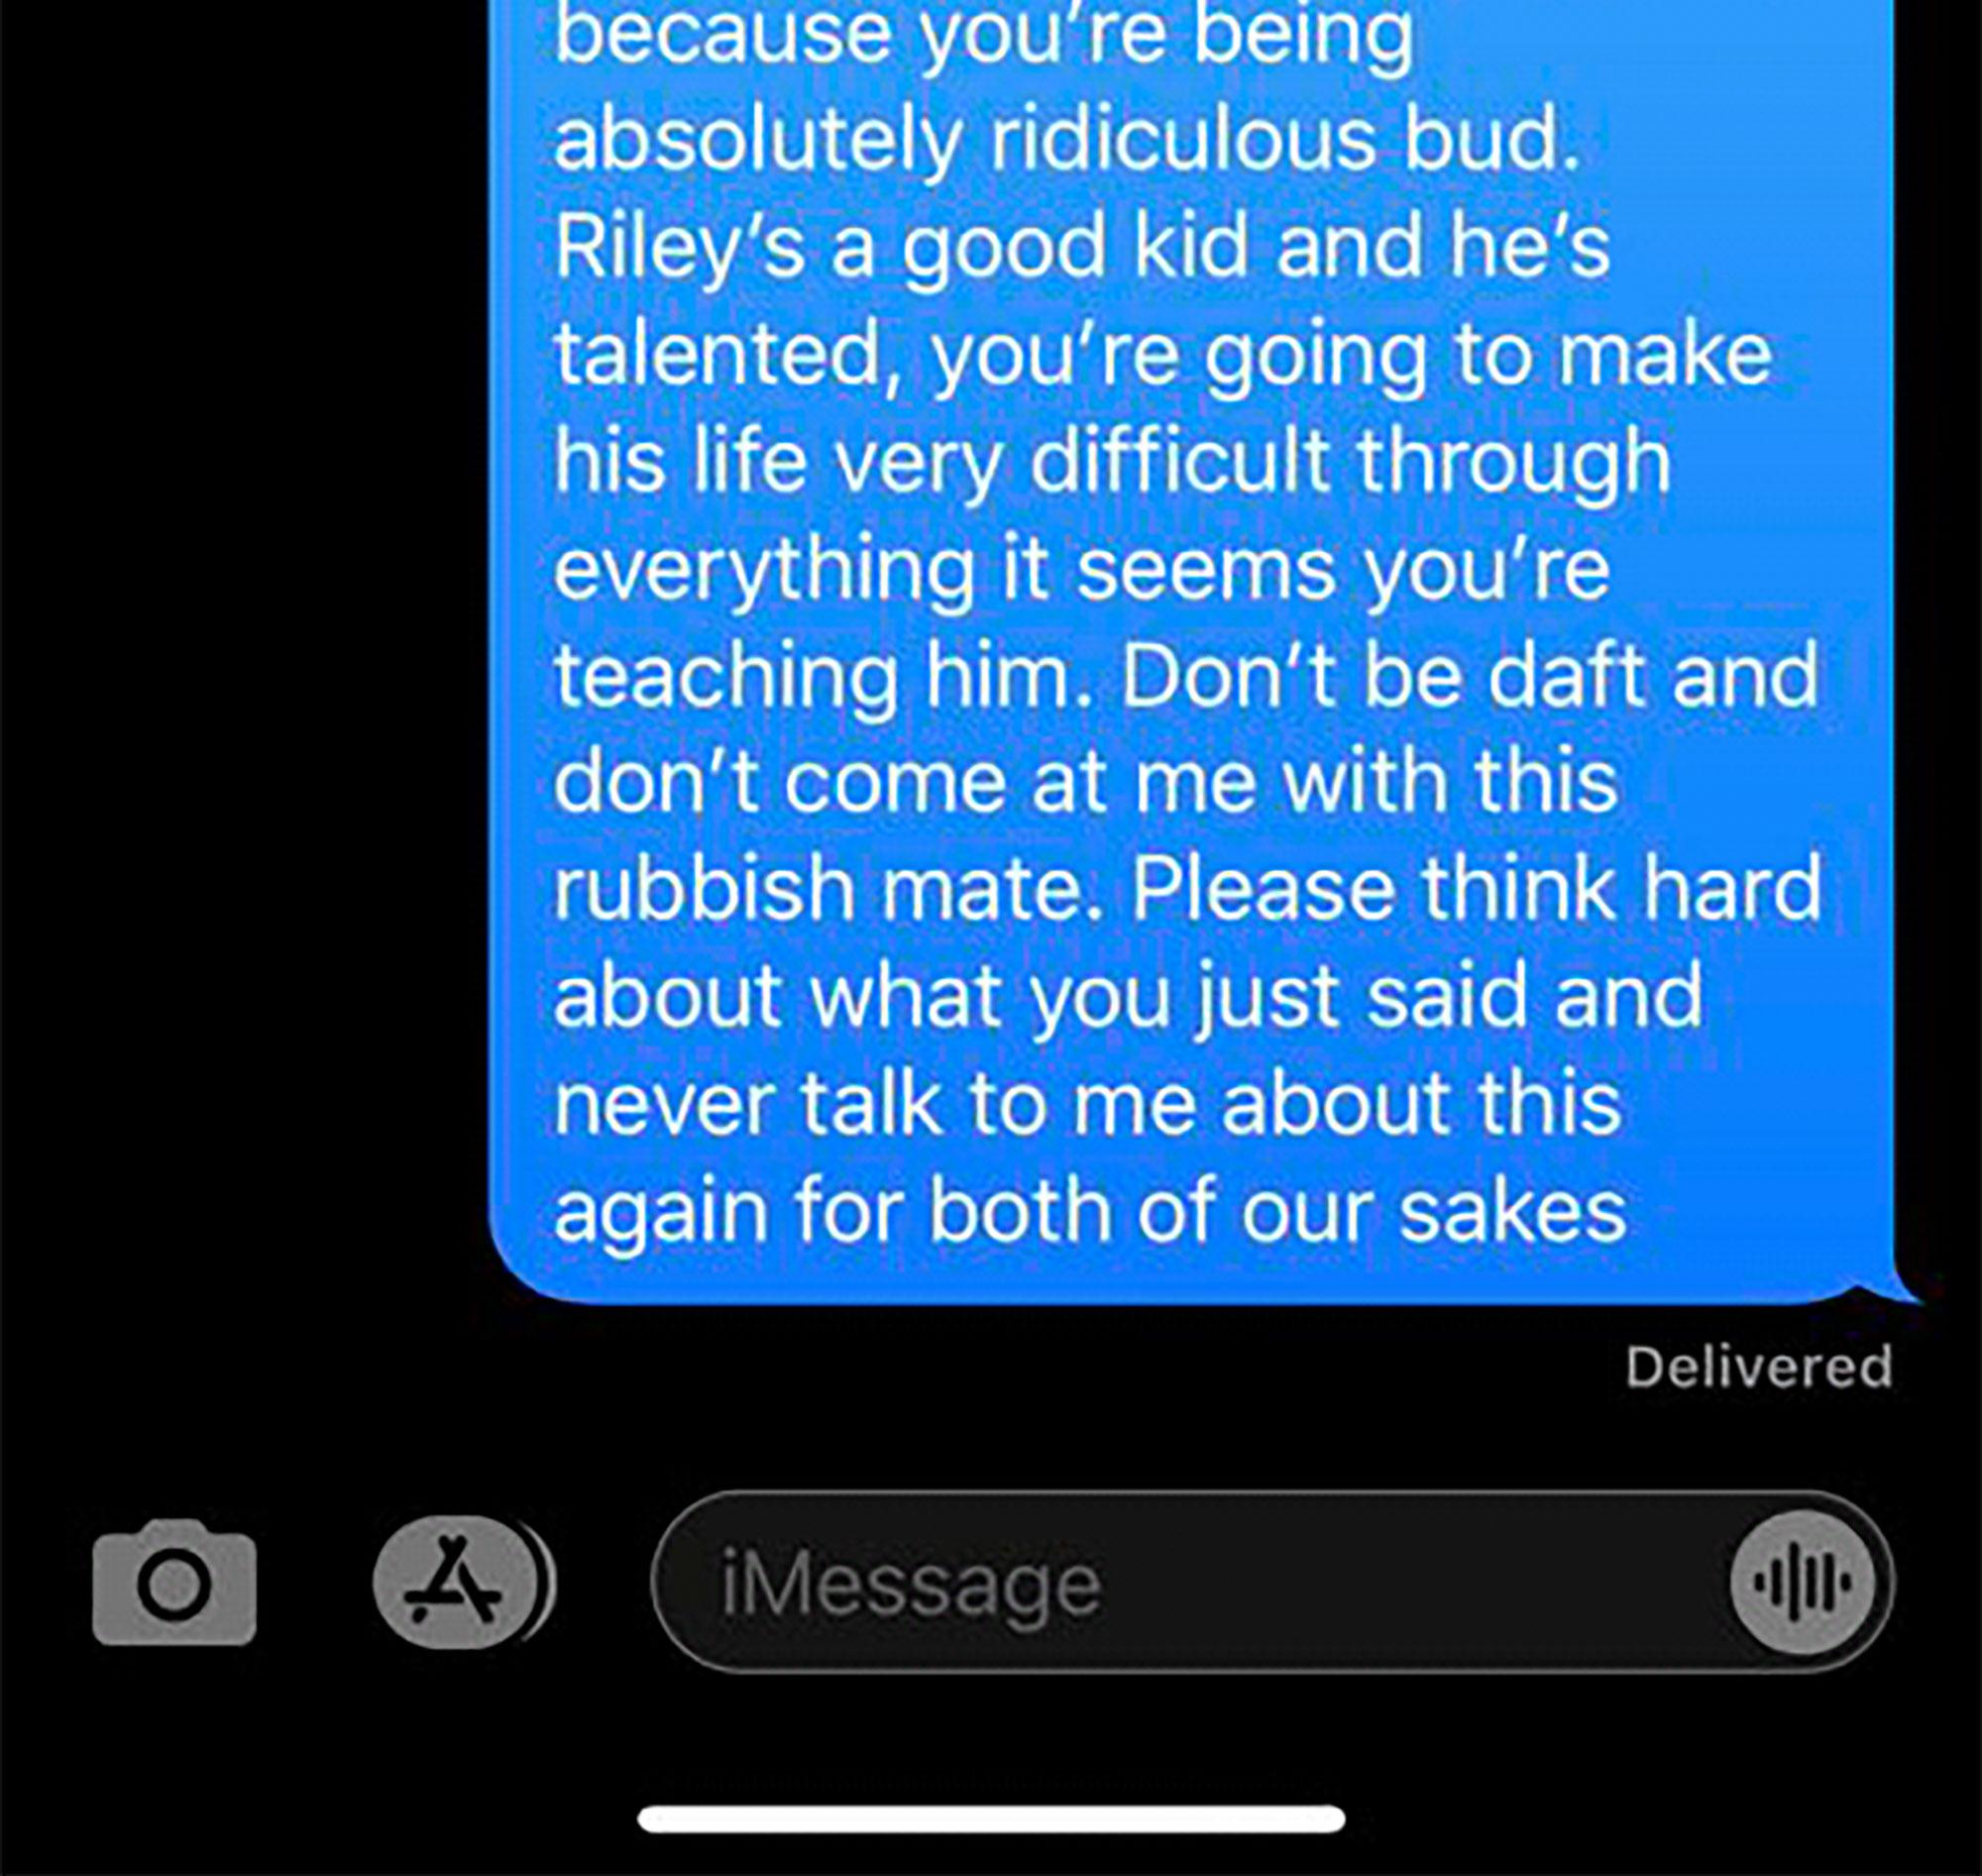 oneness - because you're being absolutely ridiculous bud. Riley's a good kid and he's talented, you're going to make his life very difficult through everything it seems you're teaching him. Don't be daft and don't come at me with this rubbish mate. Please